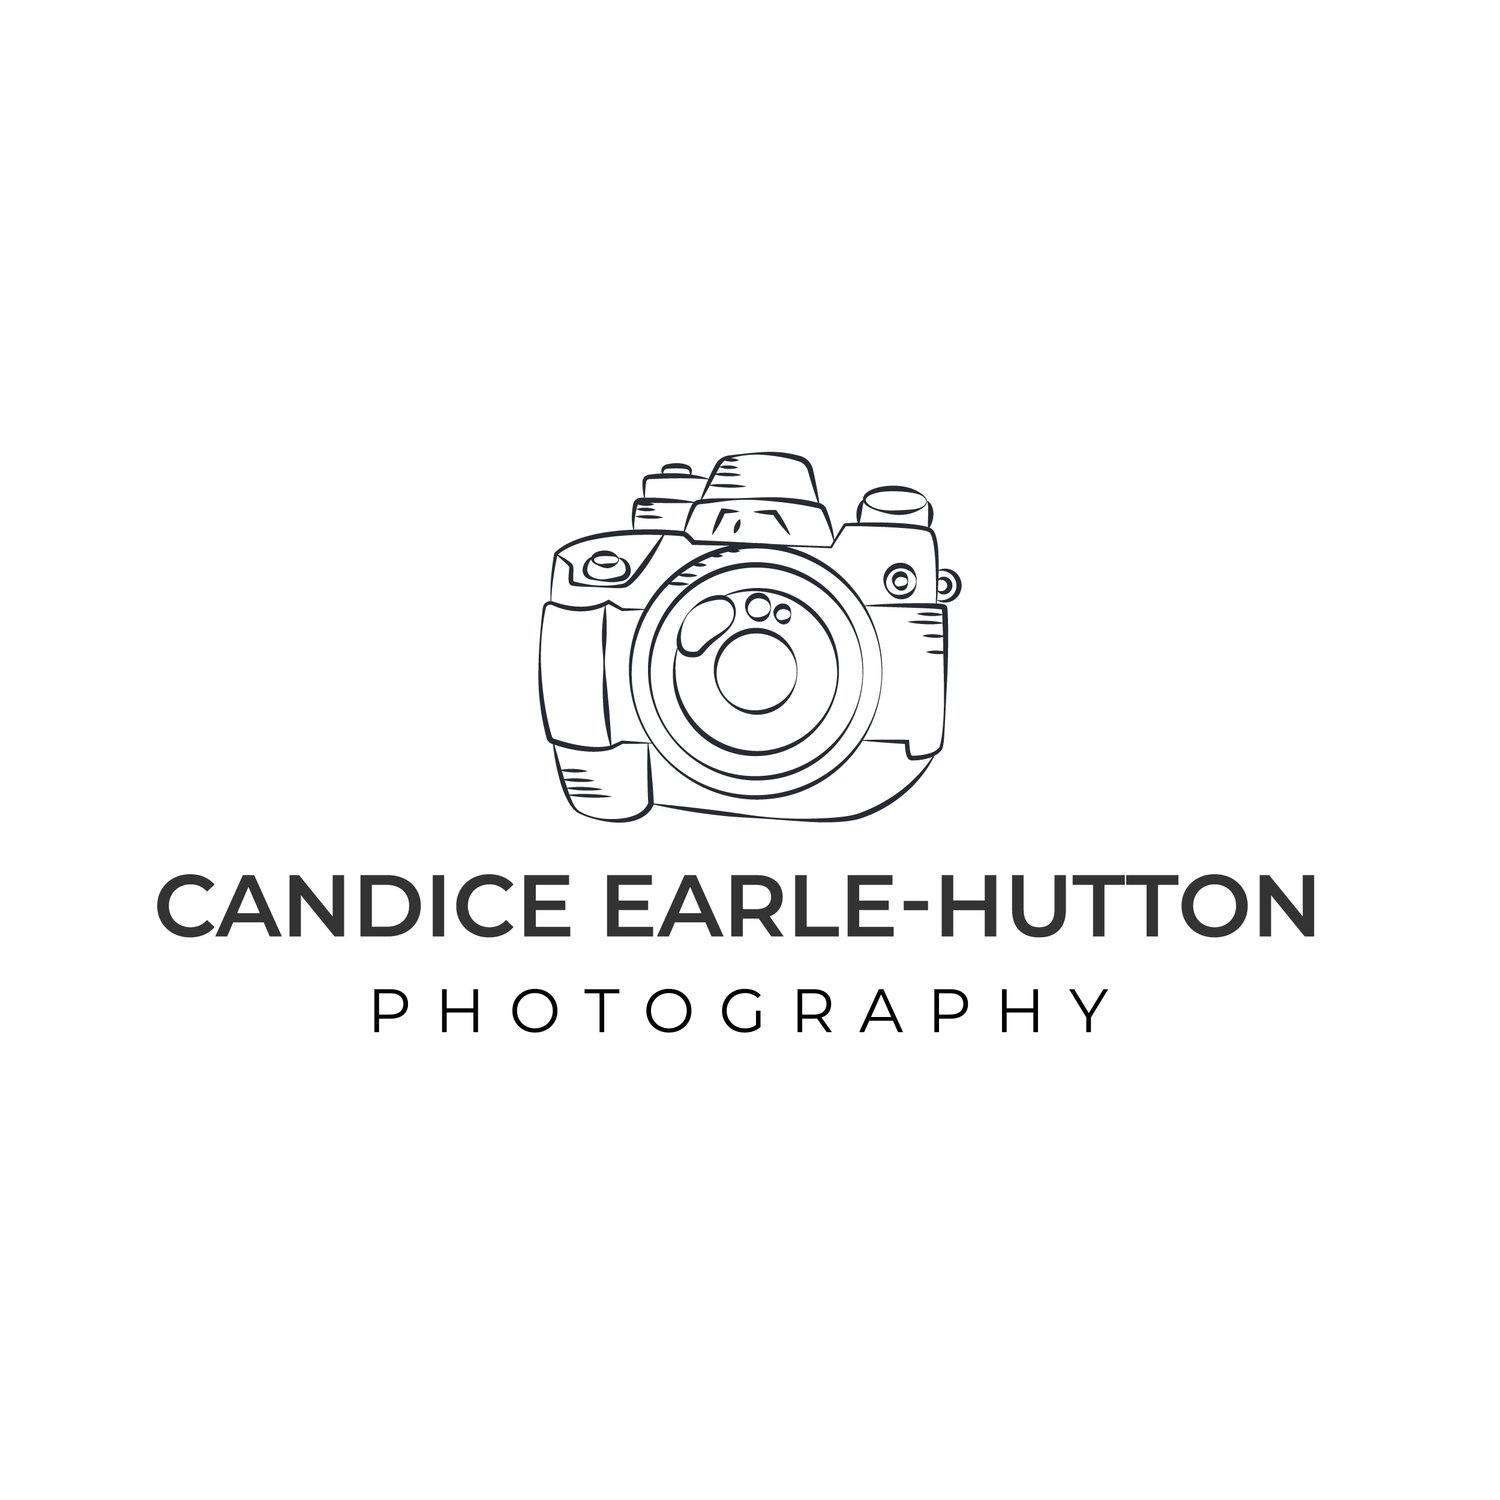 Candice Earle-Hutton Photography